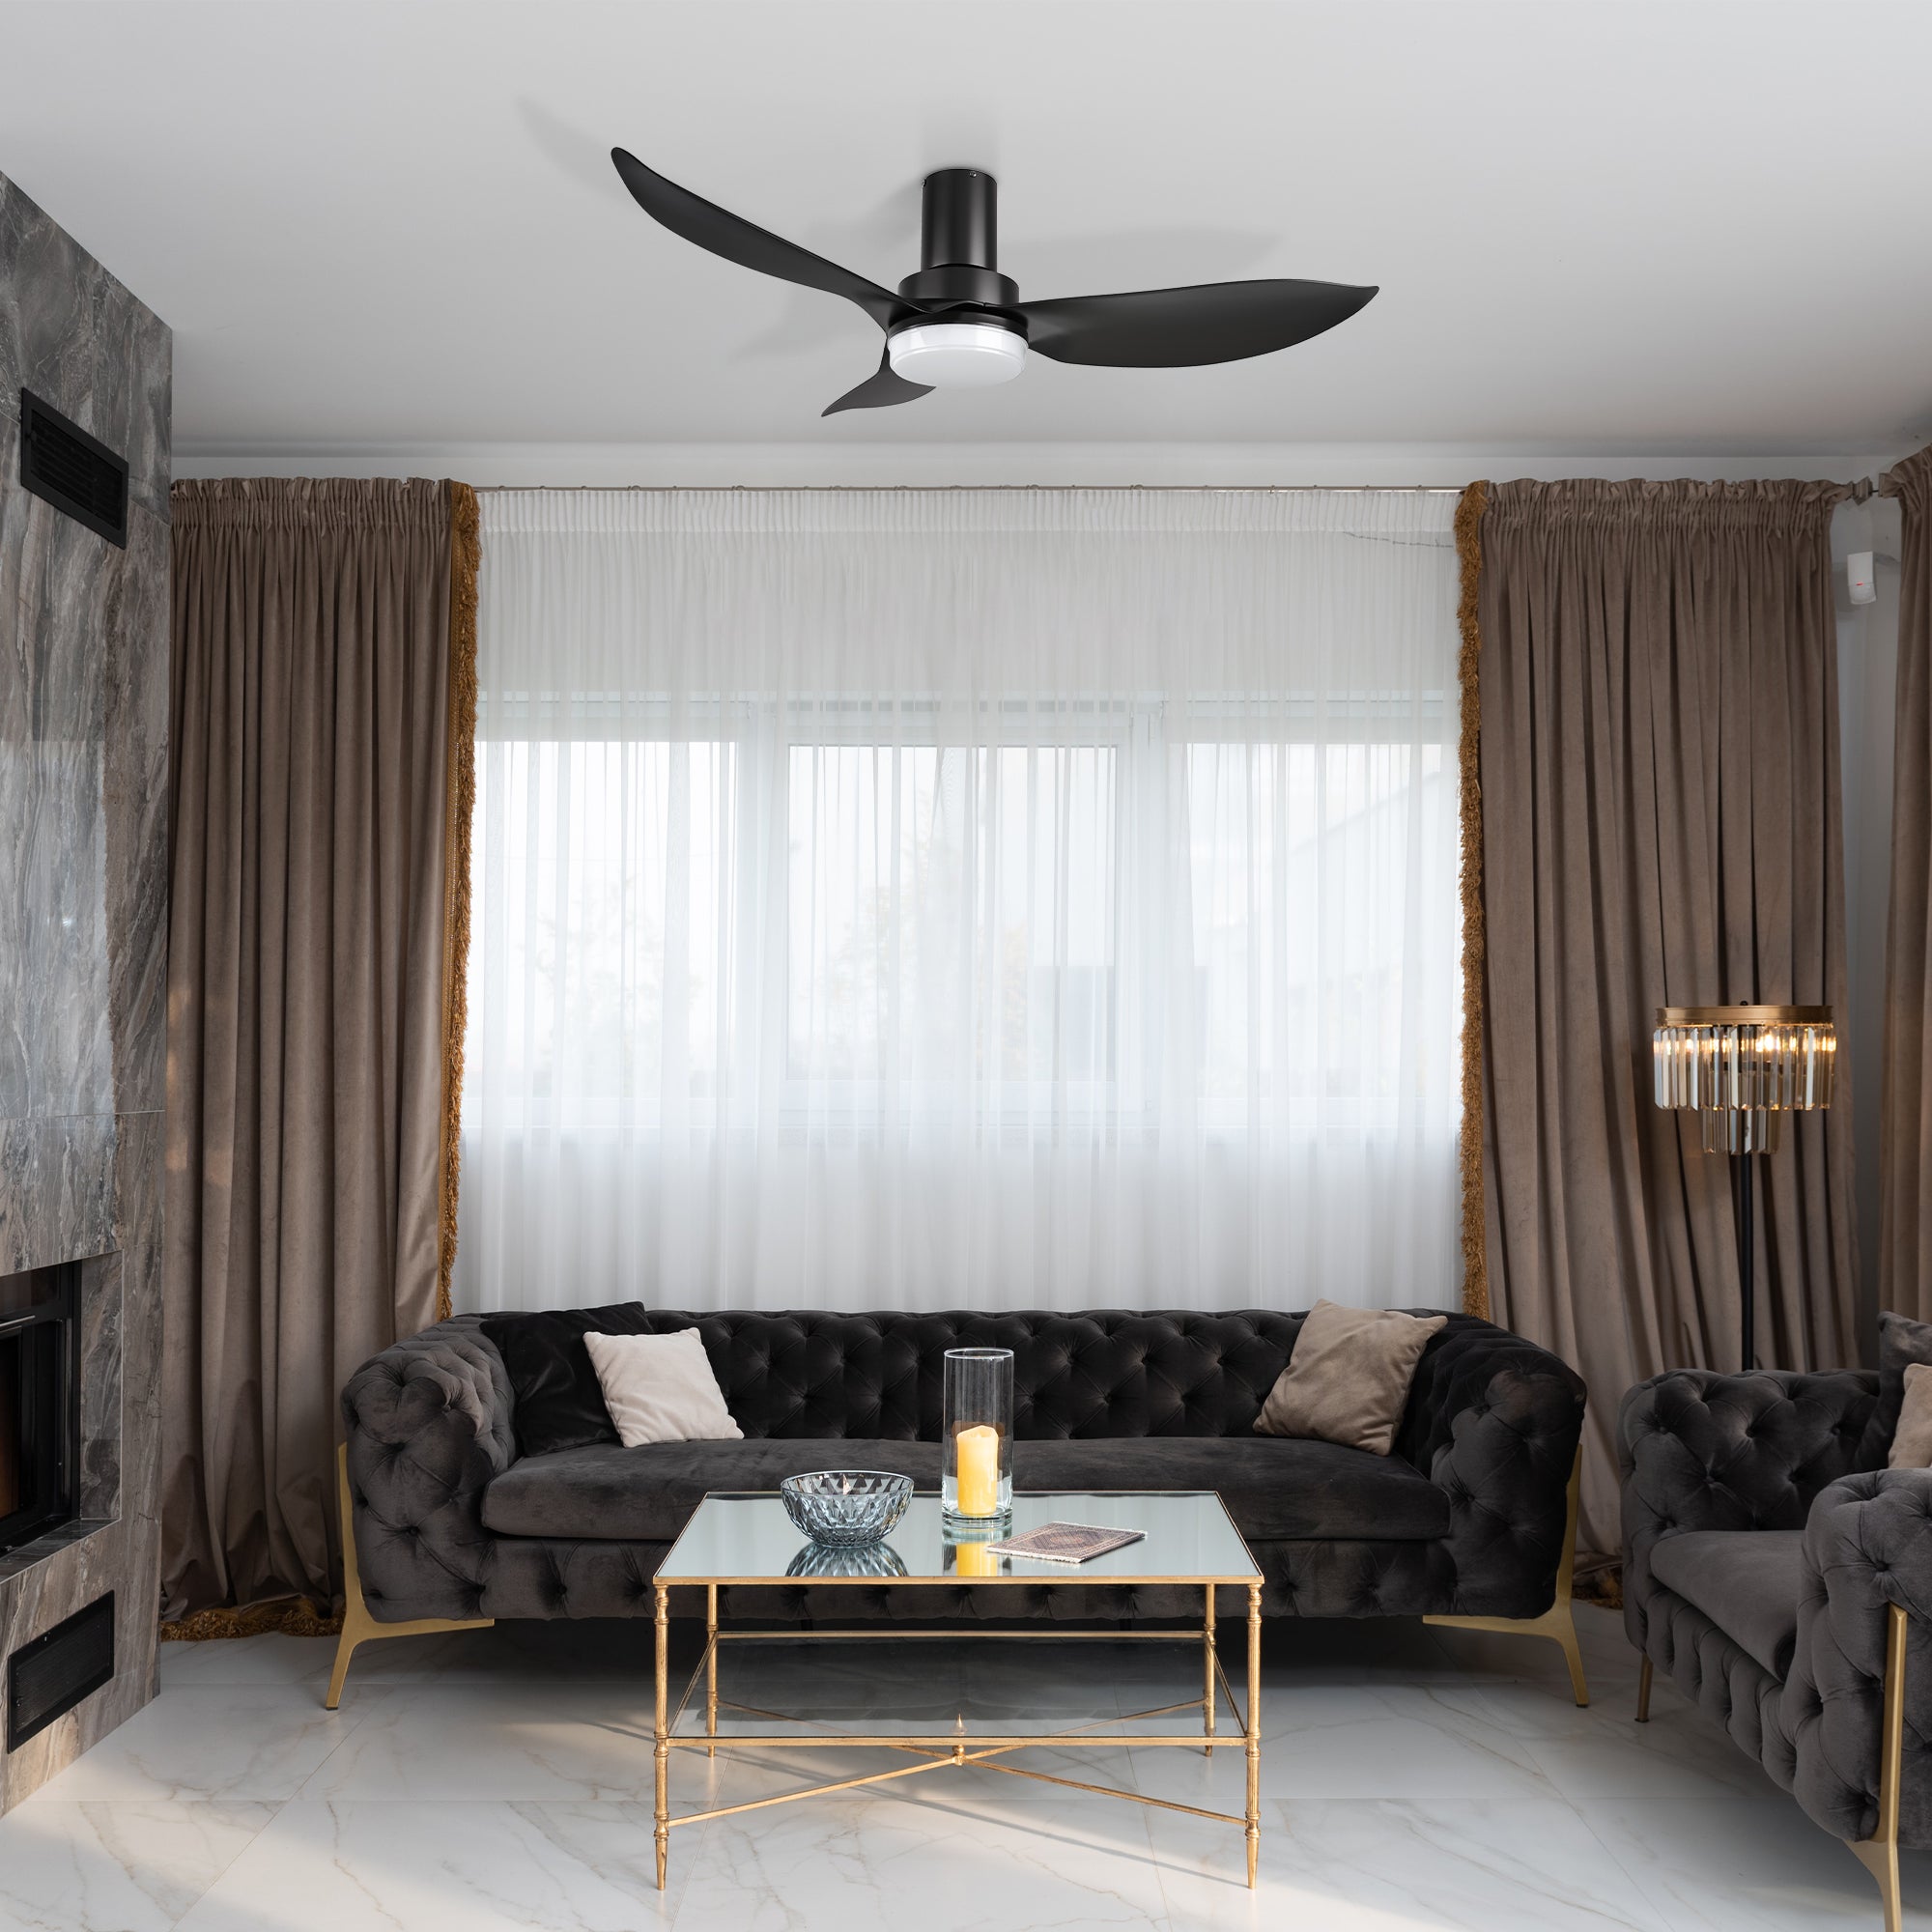 This Prescott 45&#39;&#39; smart ceiling fan keeps your space cool, bright, and stylish. It is a soft modern masterpiece perfect for your indoor living spaces. This Wifi smart ceiling fan is a simplicity designing with White finish, use very strong ABS blades and has an integrated 4000K LED daylight. The fan features Remote control, Wi-Fi apps, Siri Shortcut and Voice control technology (compatible with Amazon Alexa and Google Home Assistant ) to set fan preferences.